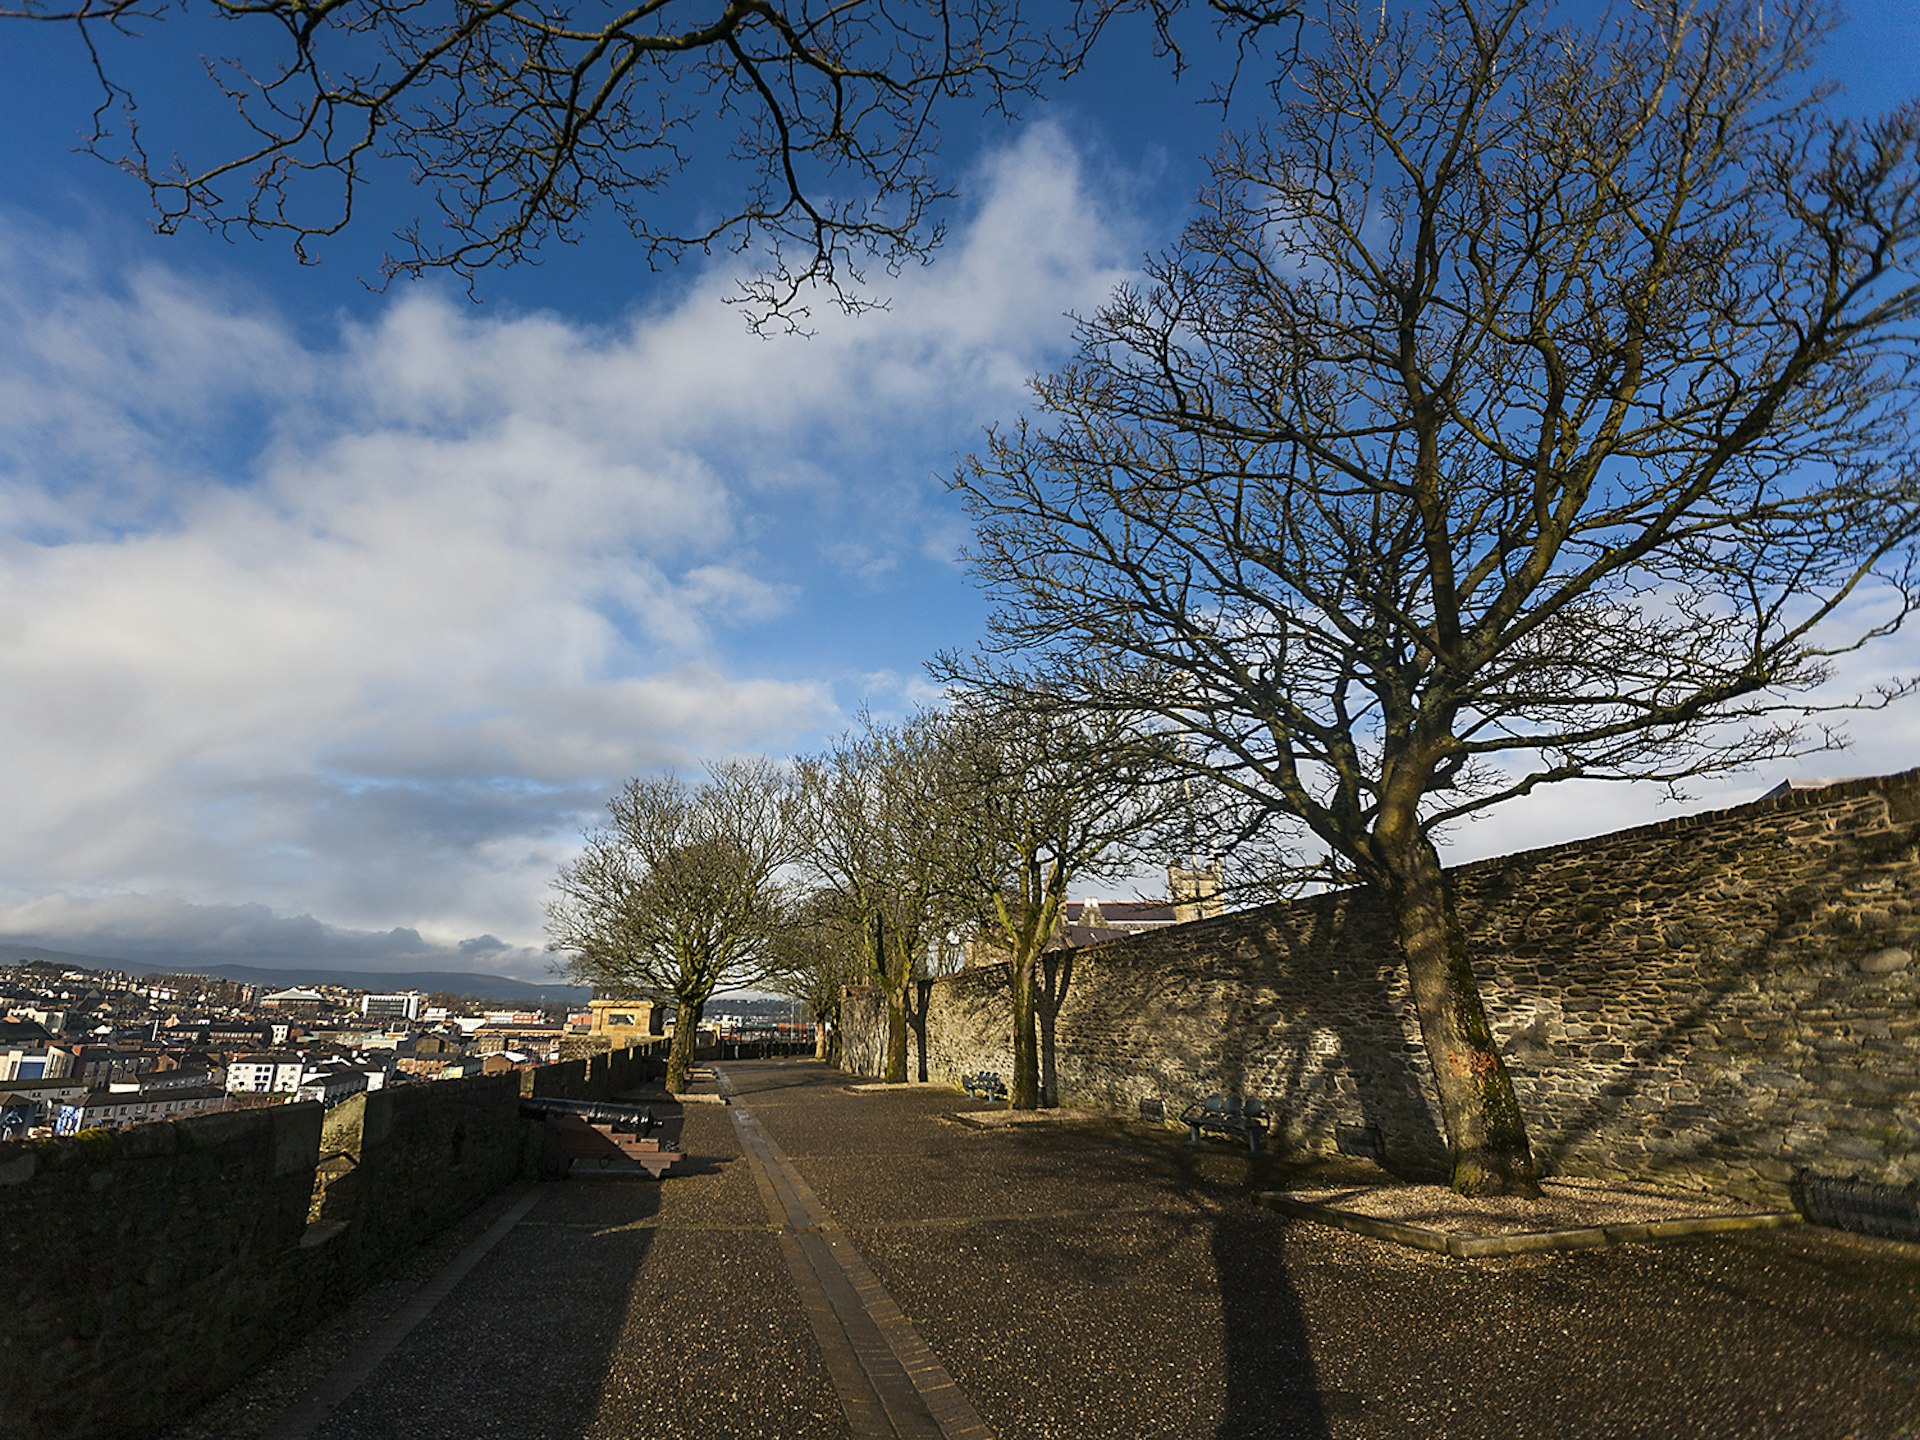 A wander along the walls of Derry. Image by Greg Clarke / CC BY 2.0